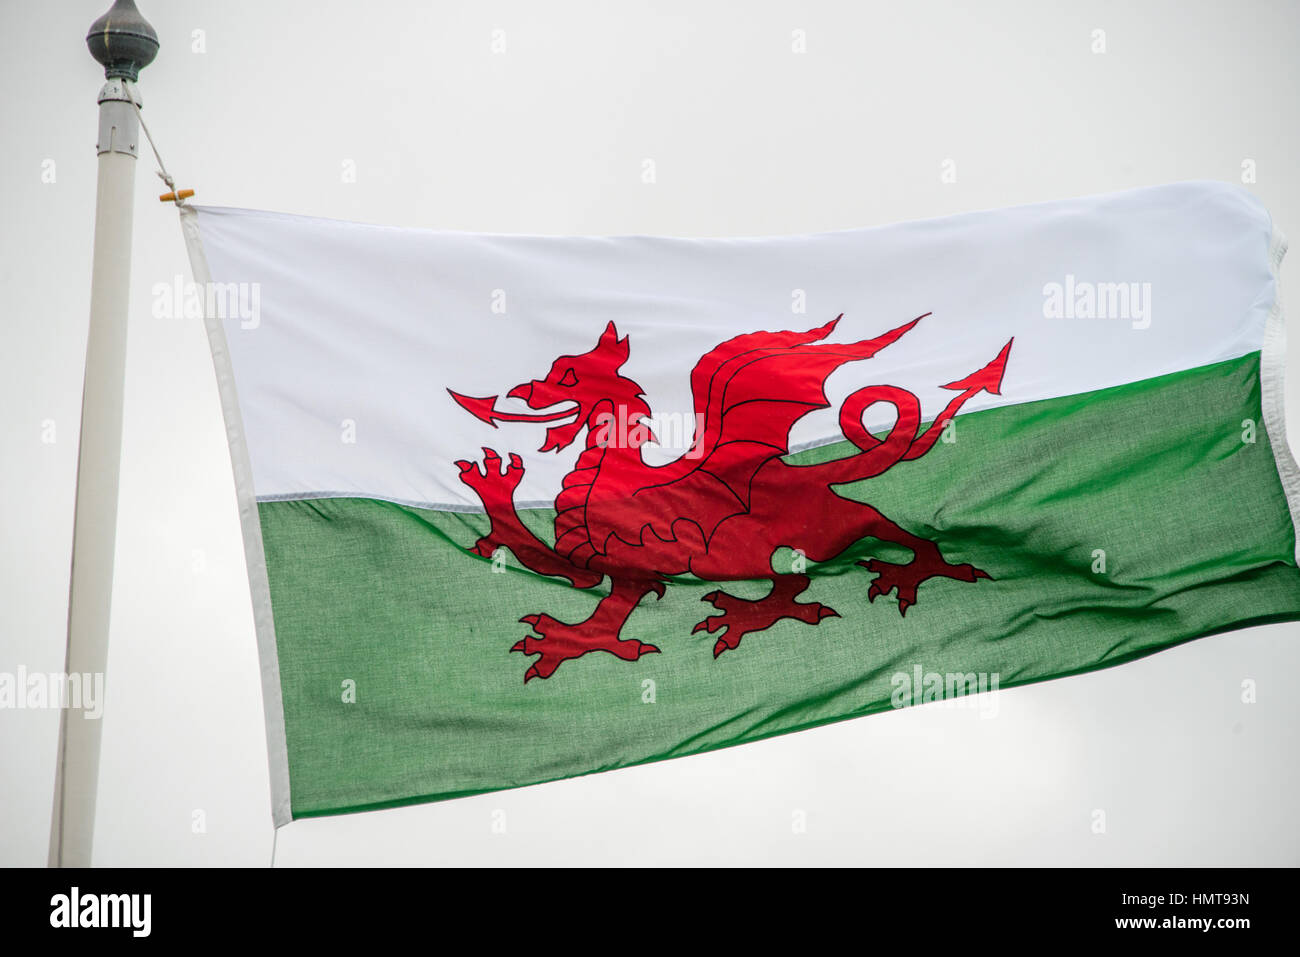 The Welsh flag against a cloudy sky Stock Photo